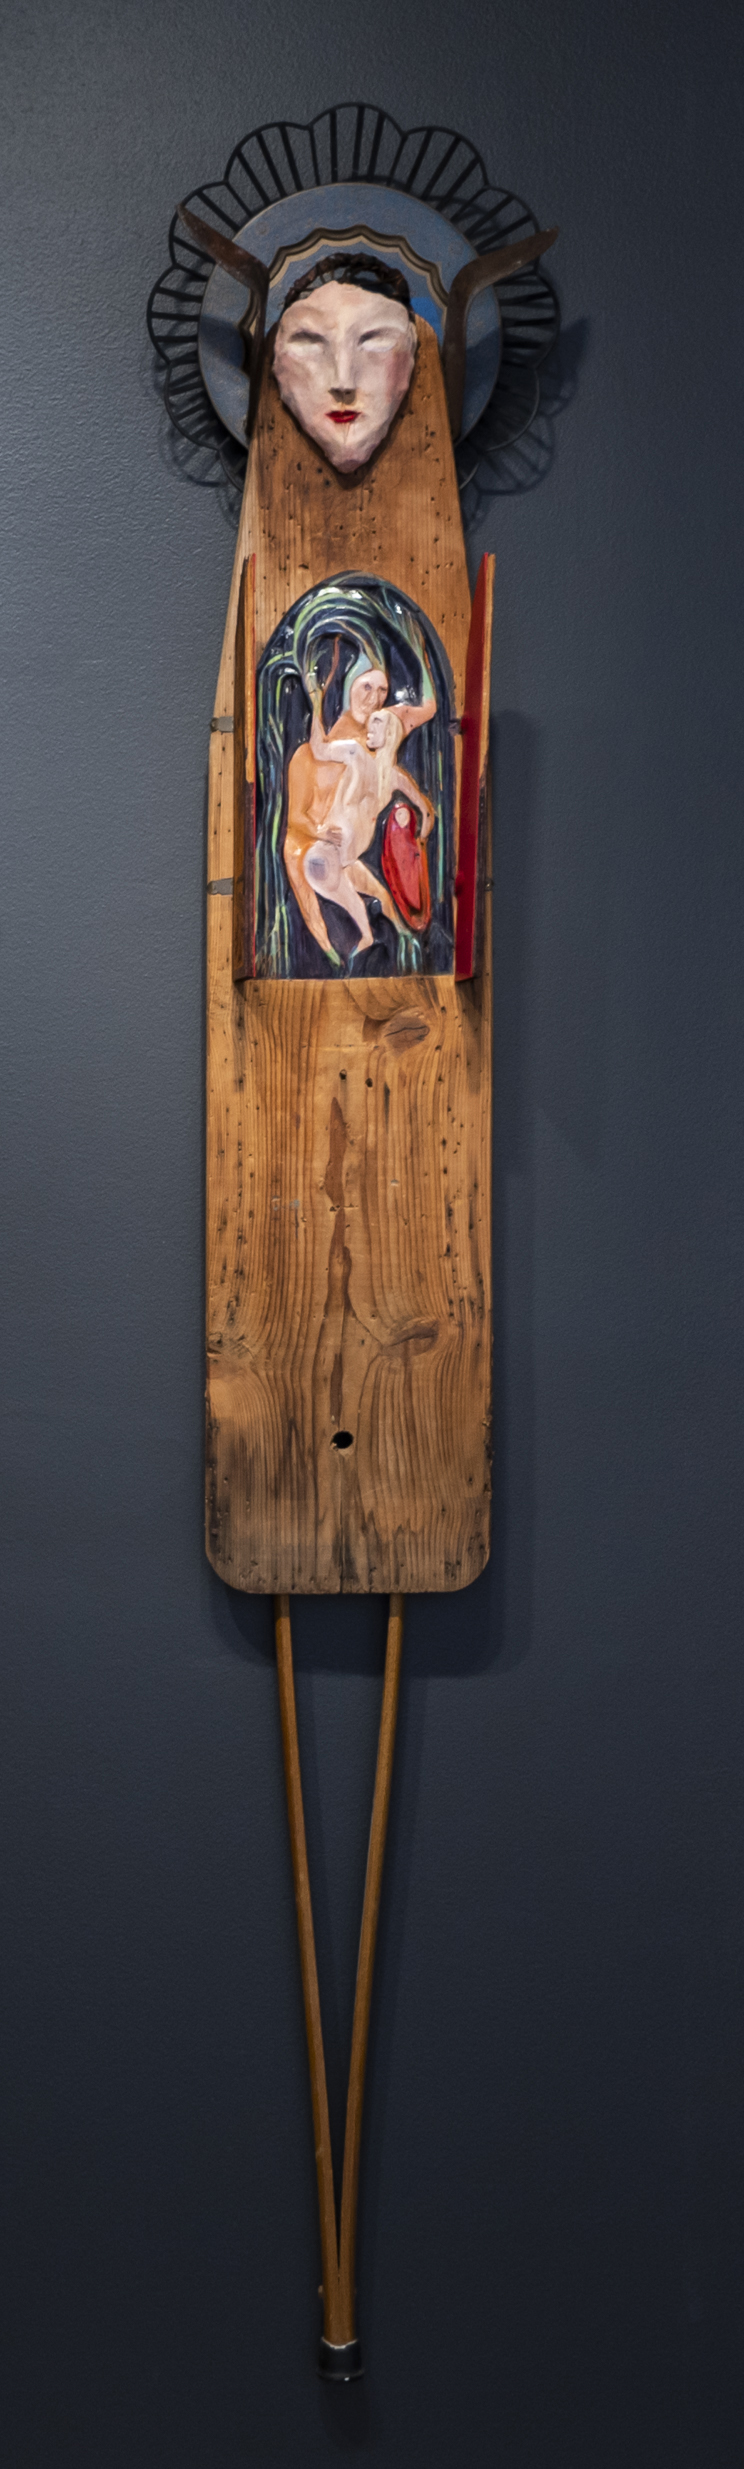 Mona RYDER Touch Up 1984-2022, carved and painted wooden ironing board, ply, leather, crutch, steel, suede, farm implements and metal plates. Private collection, Brisbane.